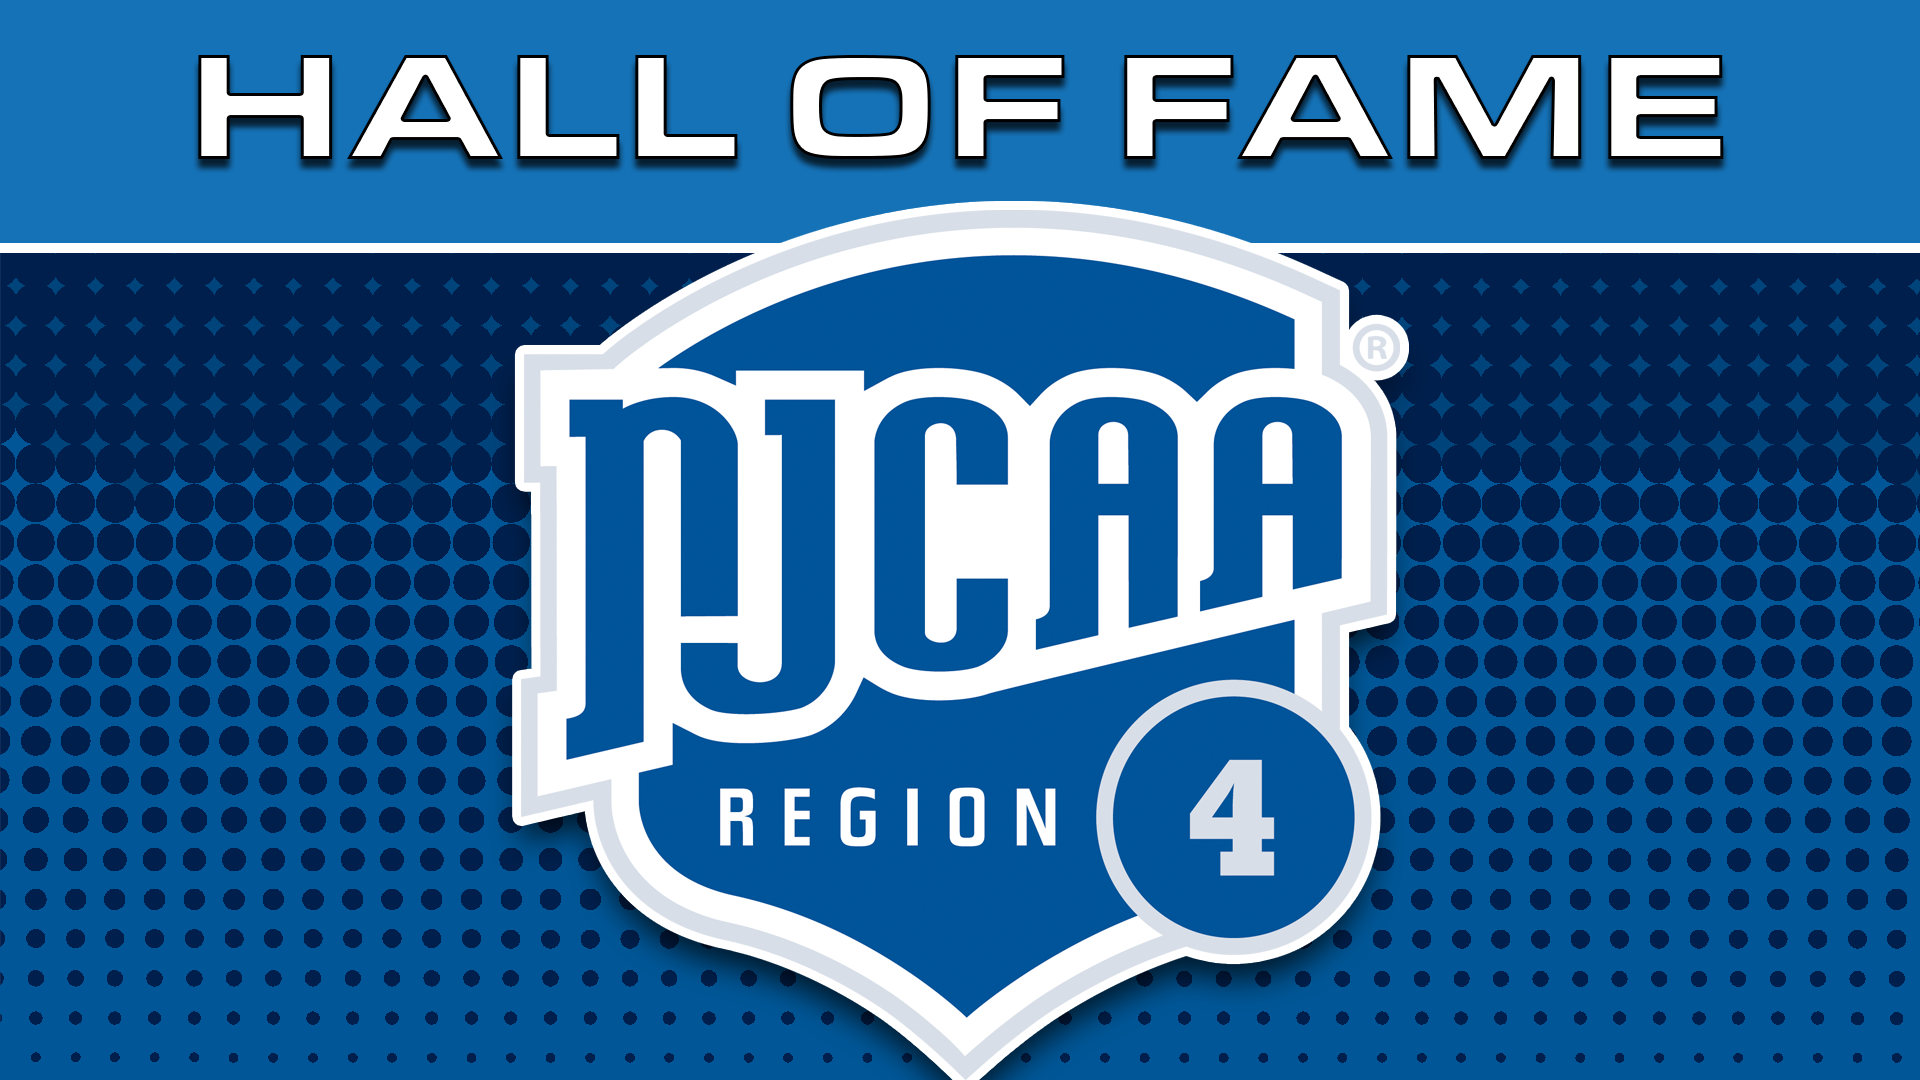 Region 4 Hall of Fame to welcome 11-member induction Class of 2022